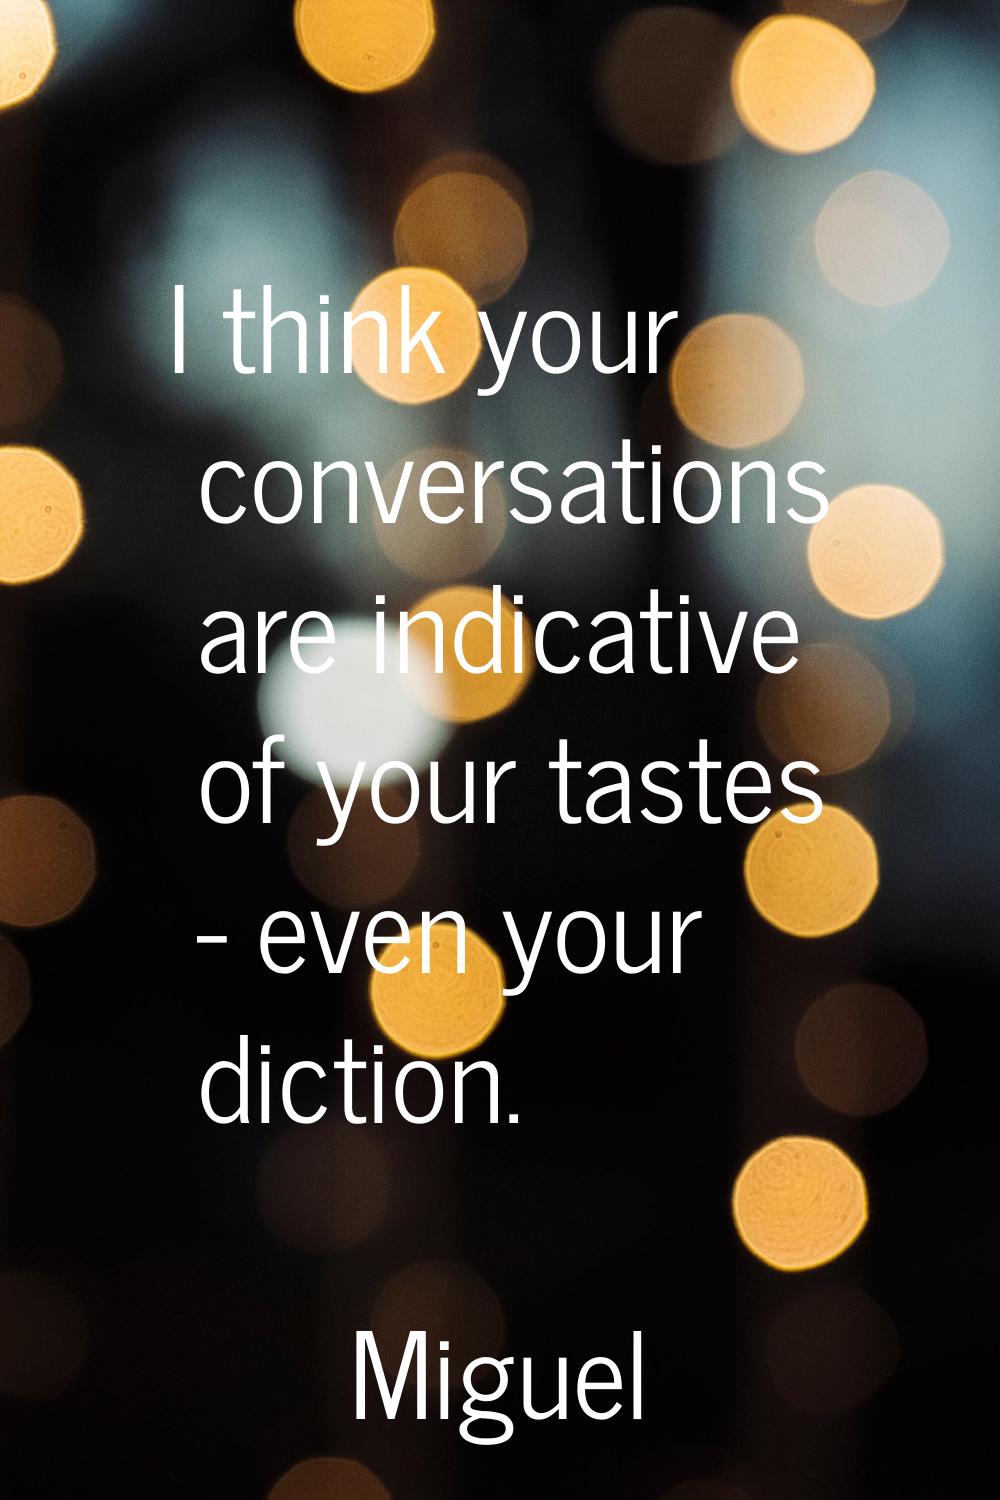 I think your conversations are indicative of your tastes - even your diction.